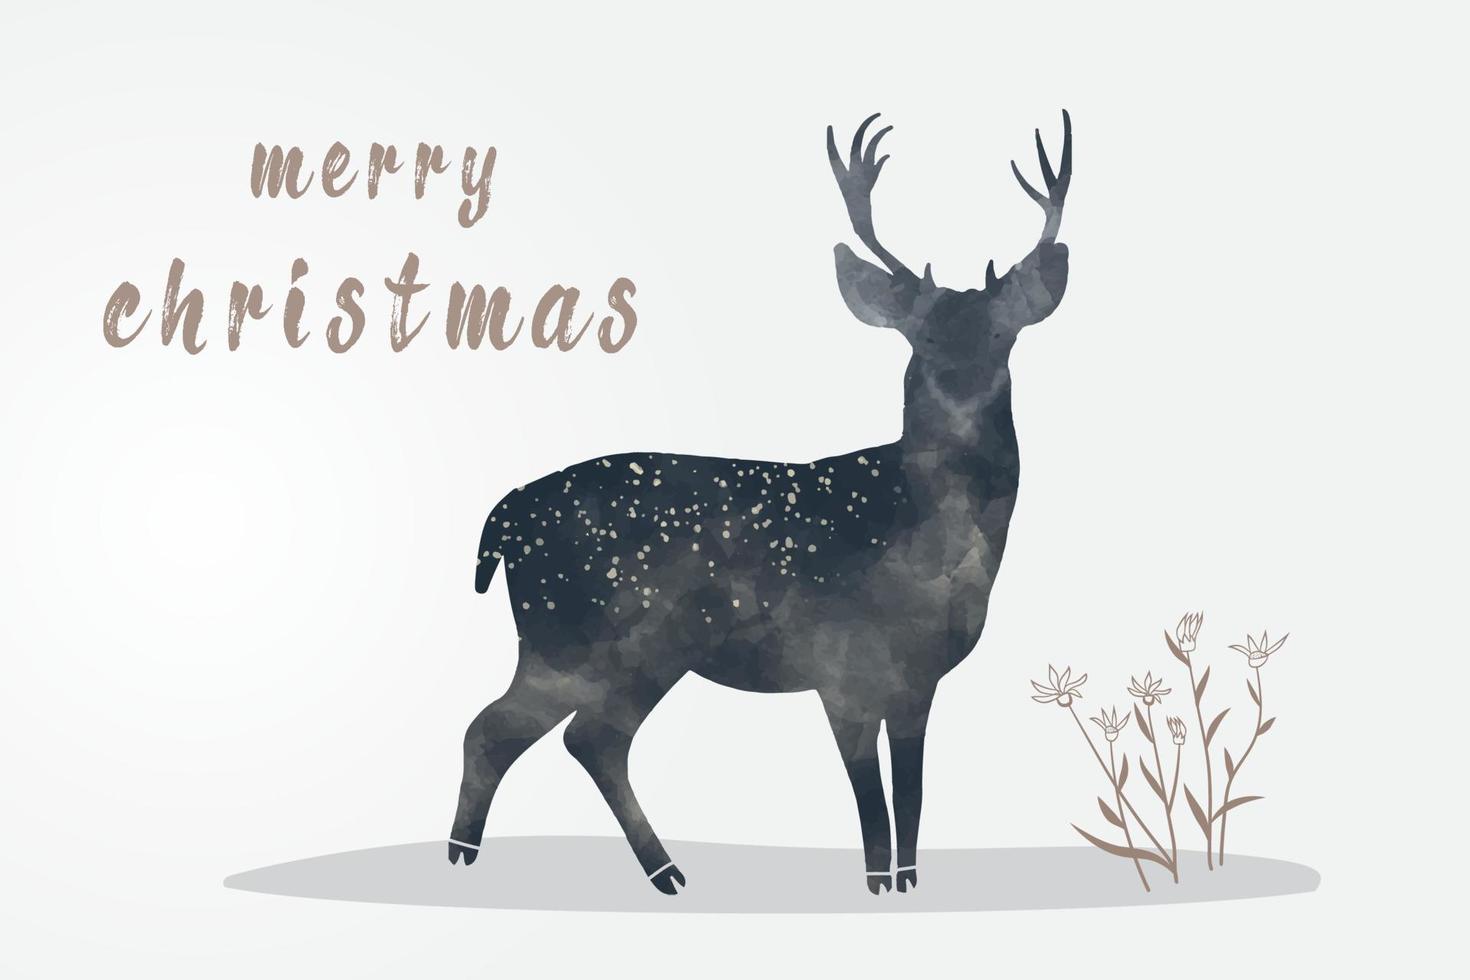 Christmas card with silhouette Deer illustration vector